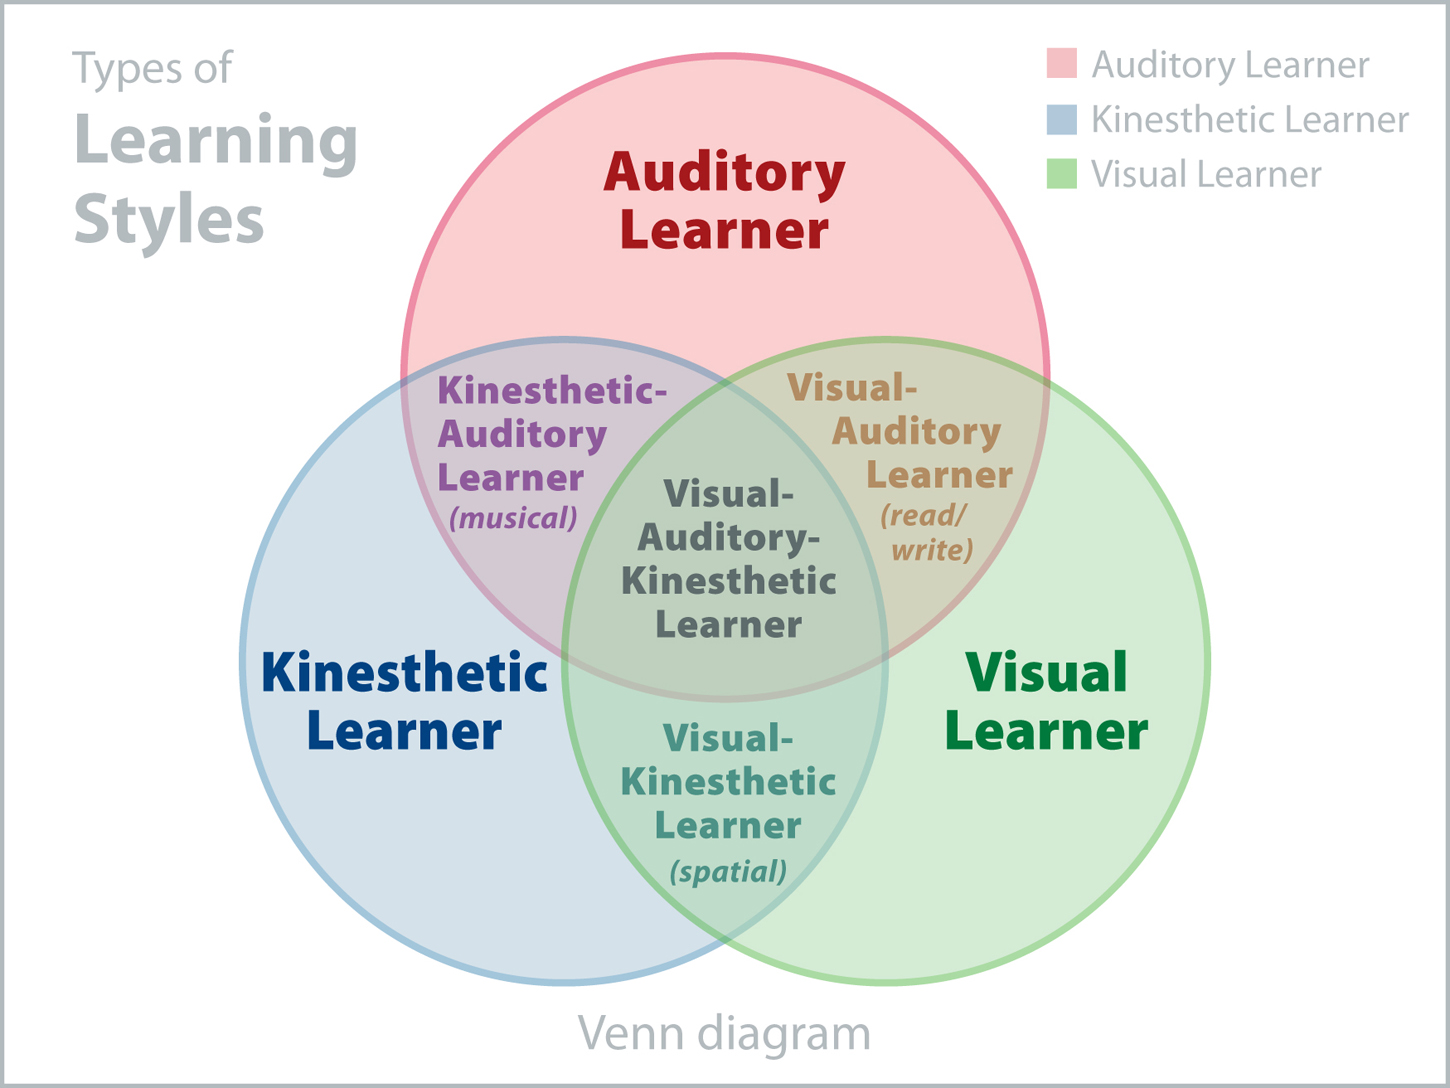 The types of Larning Styles, a Venn diagram: Red circle = Auditory learner, Green circle = Visual learner, Blue Circle = Kinesthetic learner | Red and Green Circle overlap: Visual-Auditory Learner (read/write) | Green and Blue Circle overlap: Visual-Kinesthetic Learner (spatial) | Blue and Red Circle overlap: Kinesthetic-Auditory Learner (Musical) | All Circles overlap: Visual-Auditory-Kinesthetic Learner